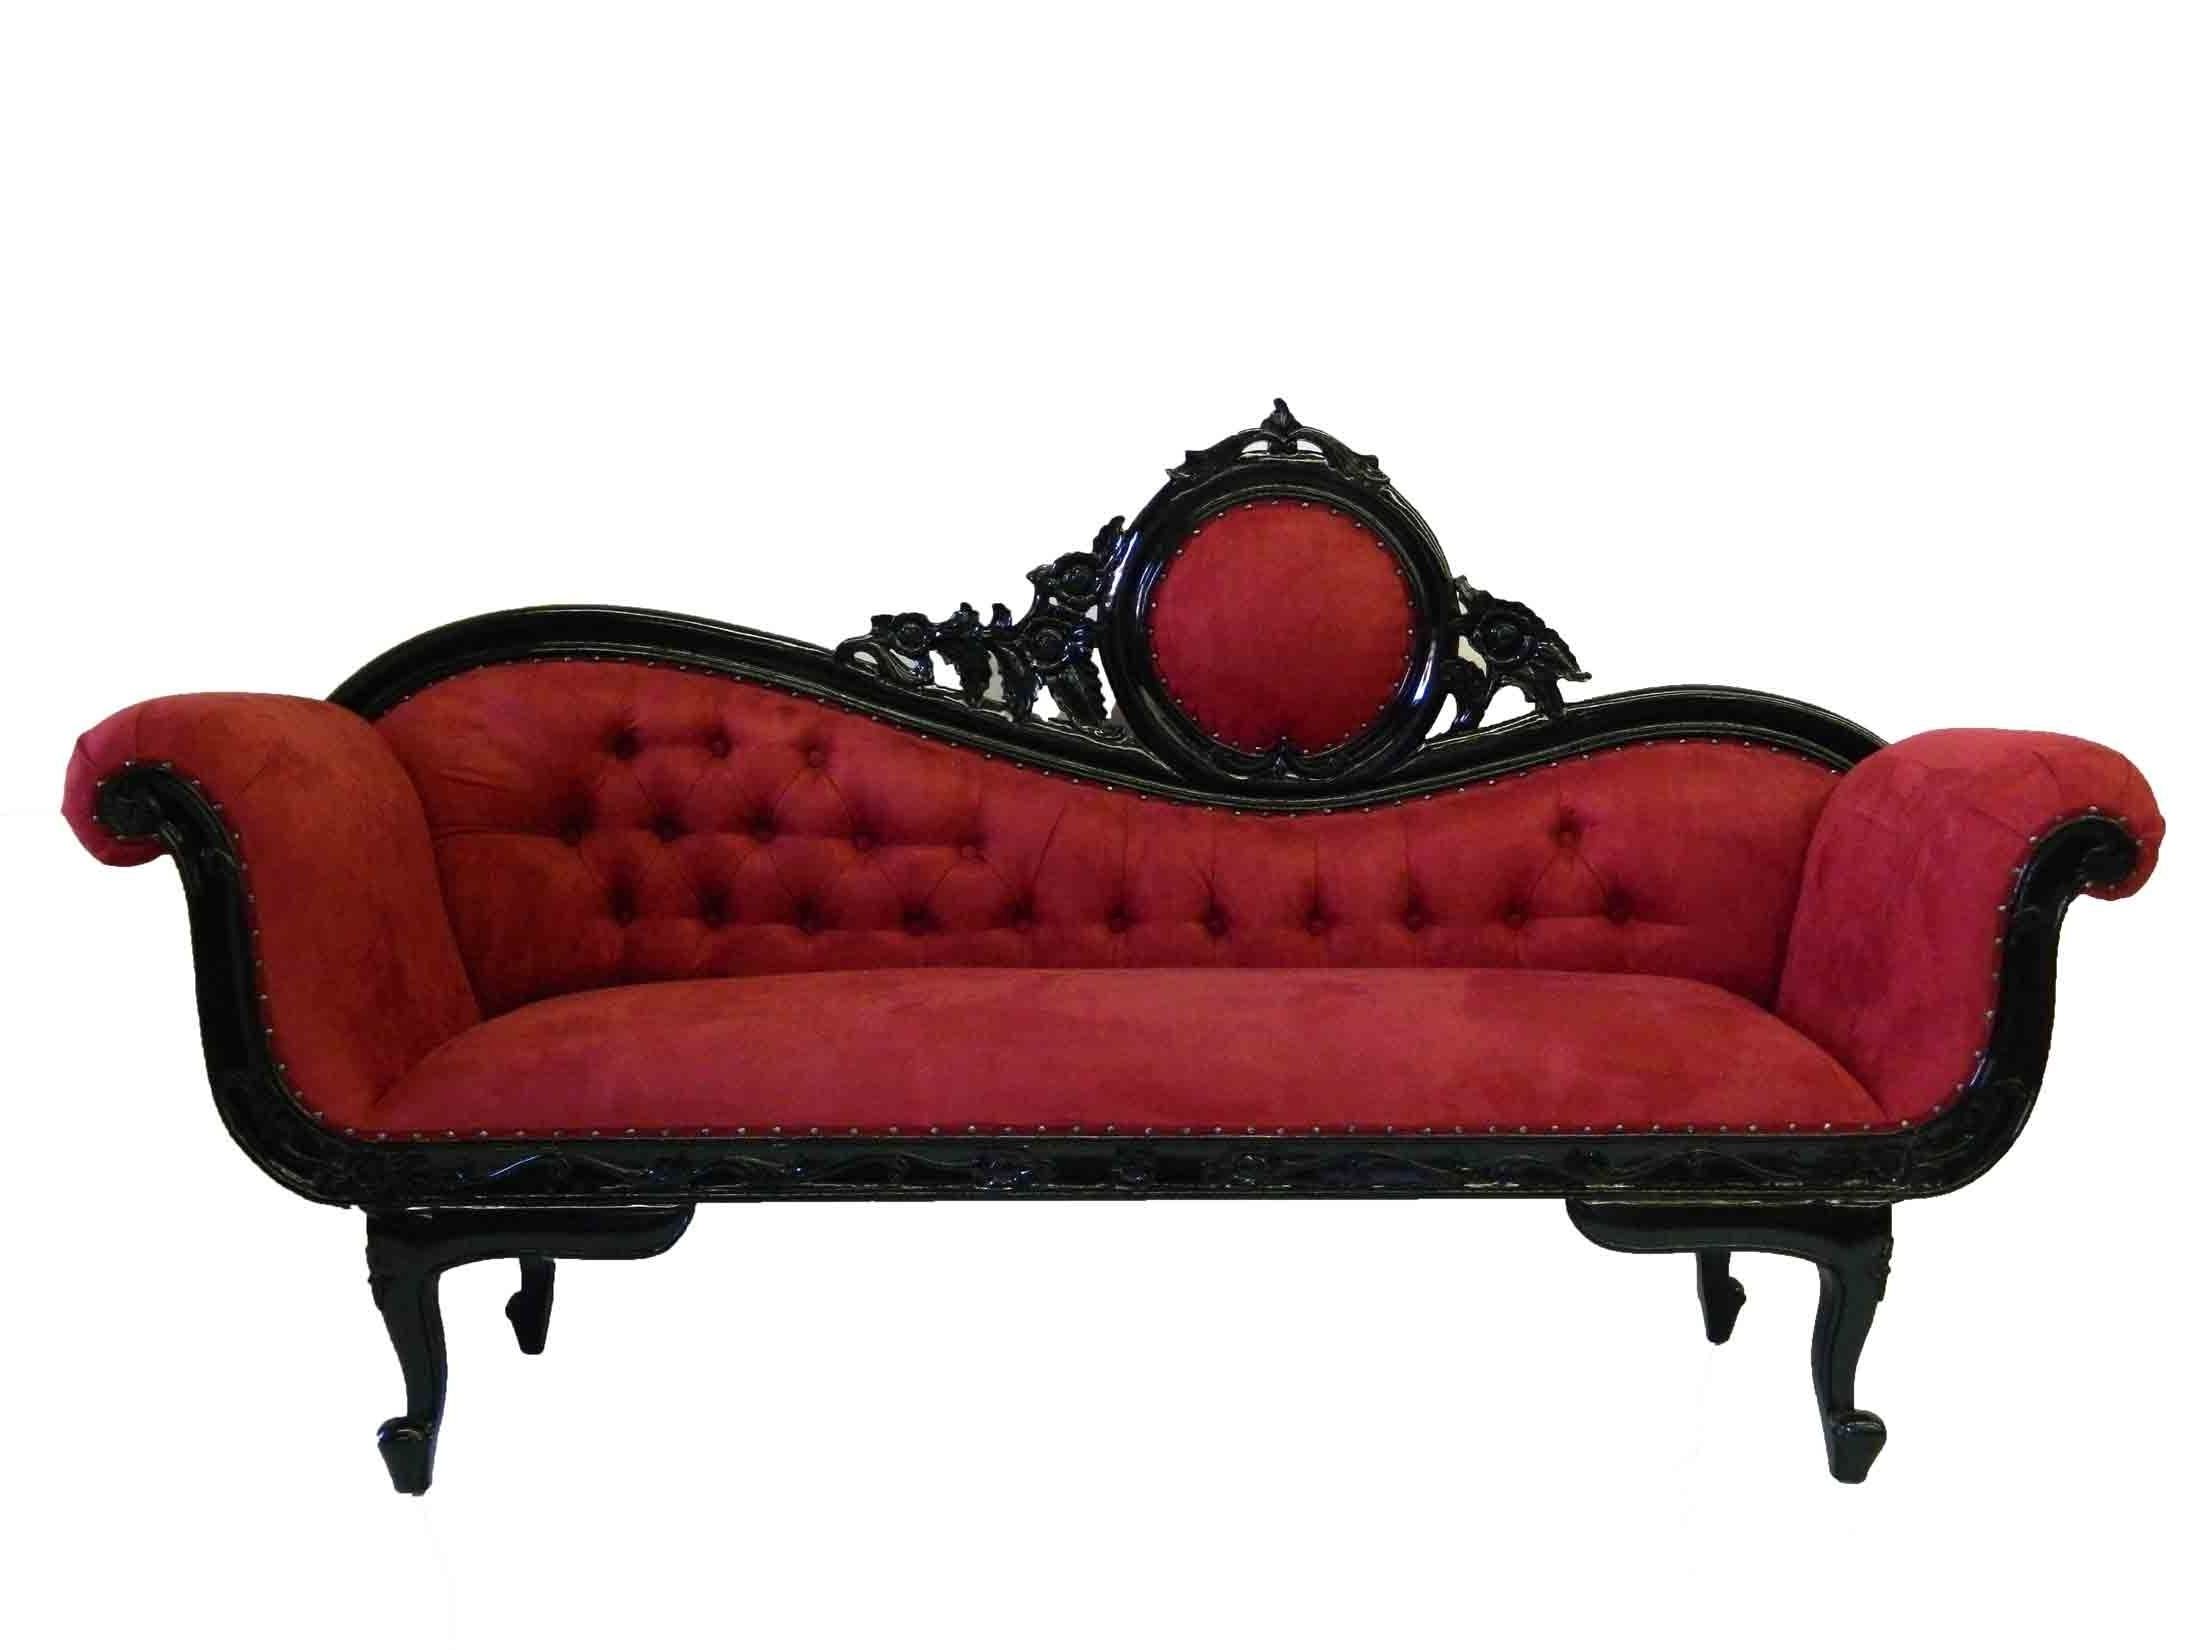 Black And Red Couch Sofa Victorian Goth Gothic Furniture Decor For In Best And Newest Gothic Sofas (View 4 of 20)